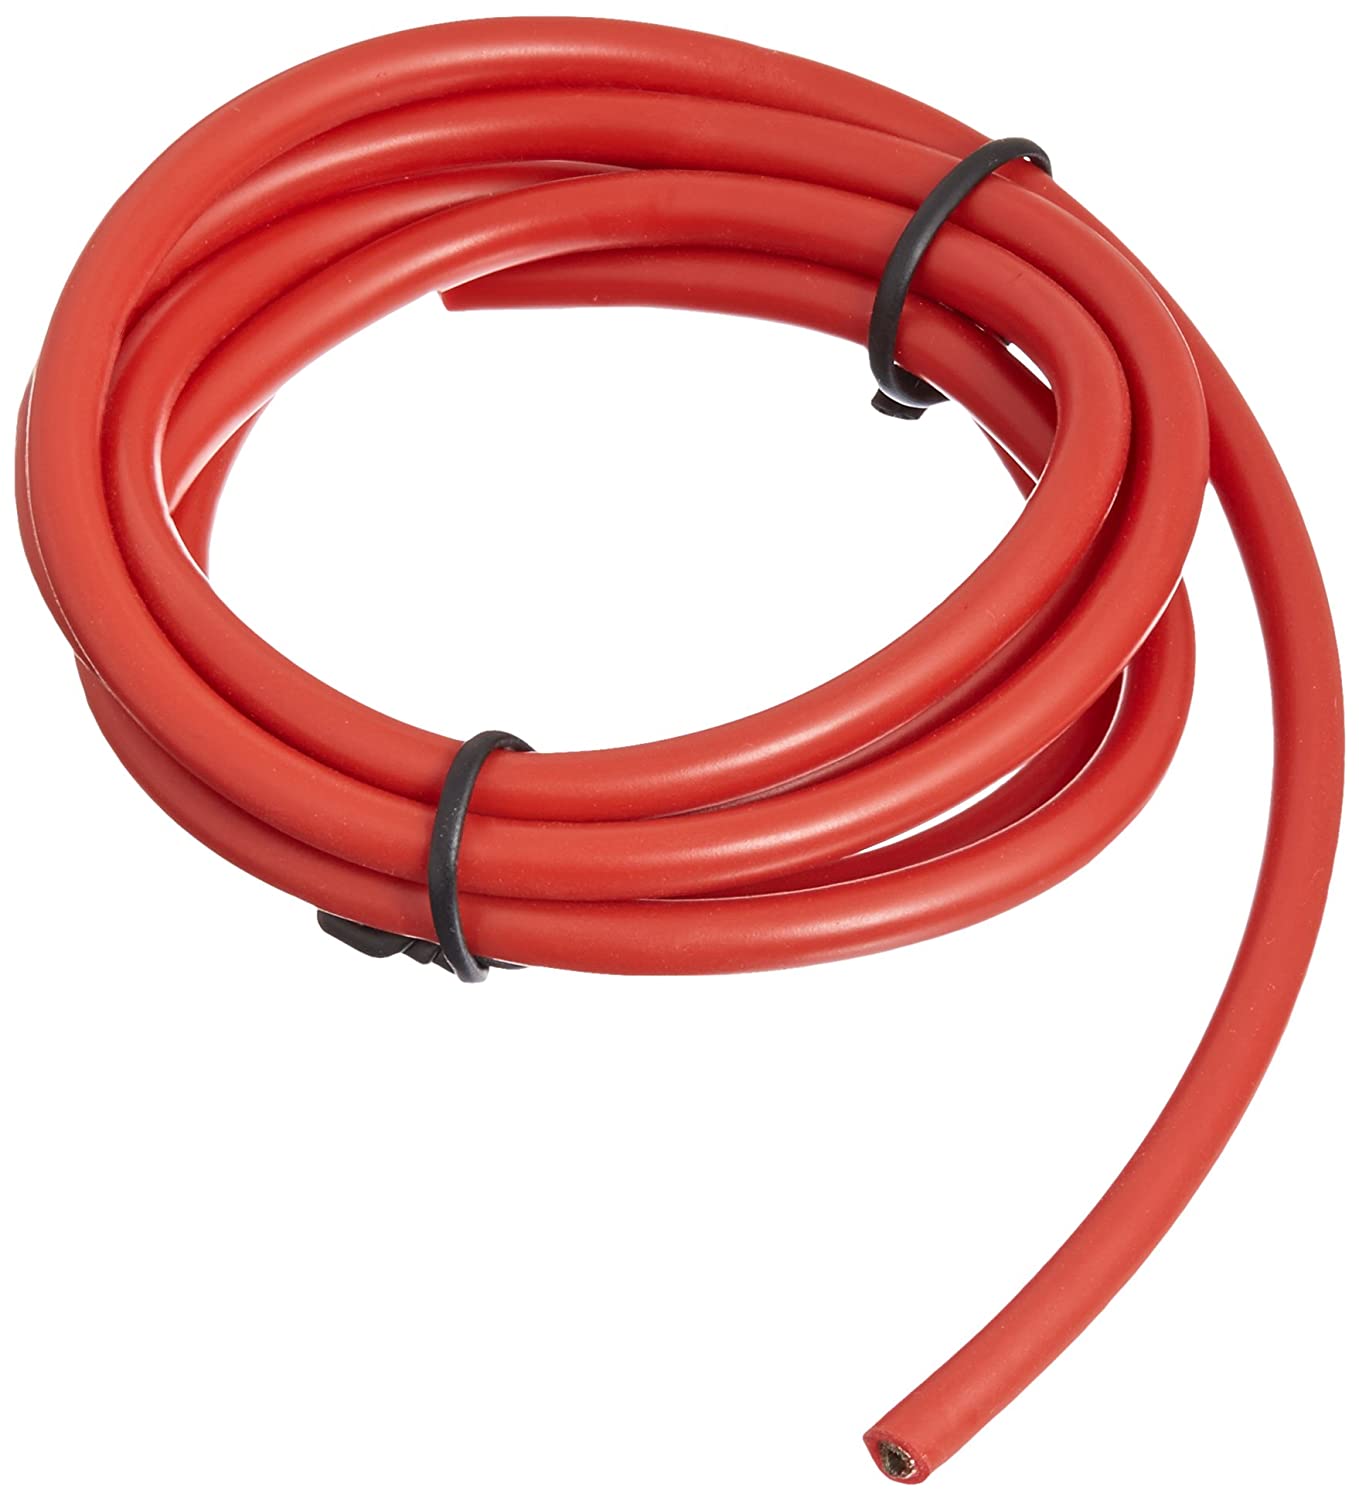 16 AWG Silicone Wire Red Ultra High Quality Super Flexible - 1 Meter